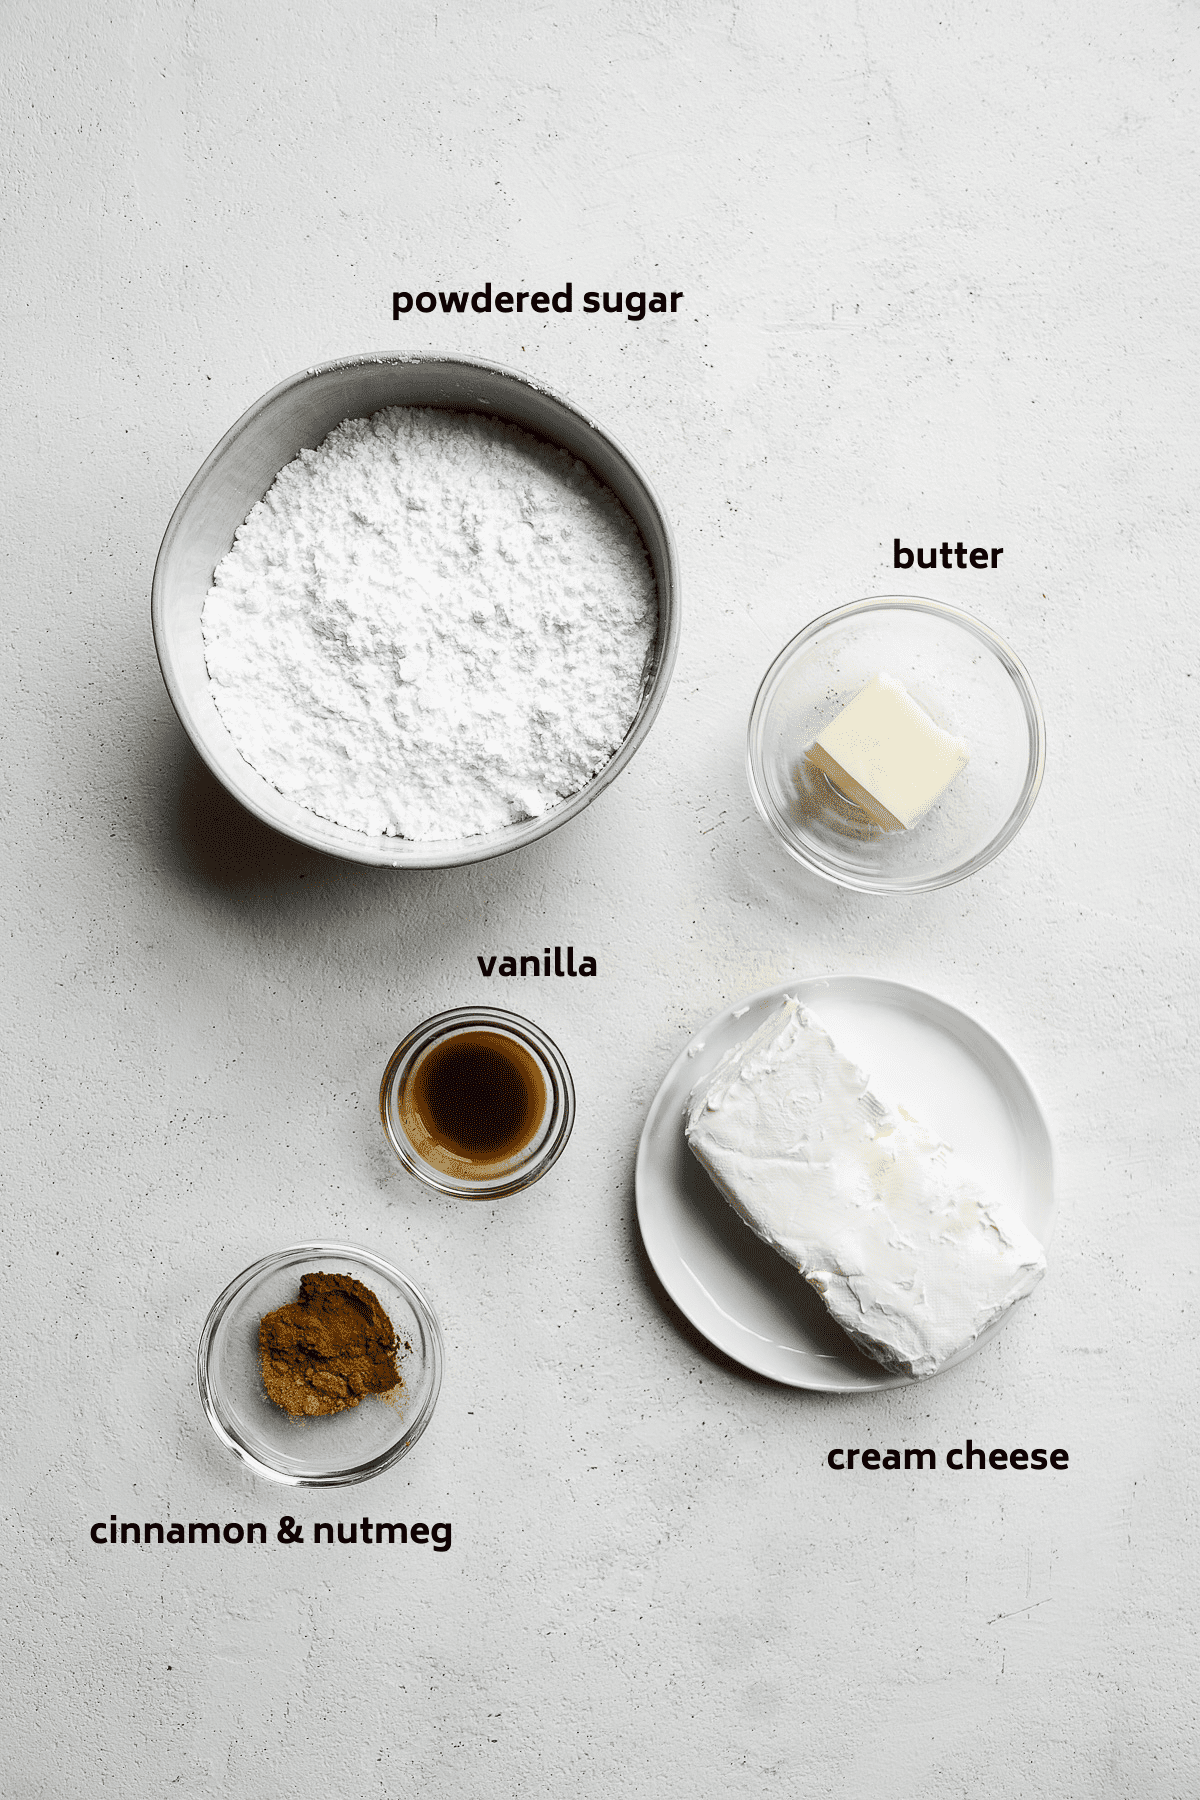 Cream cheese icing ingredients on a white surface with labels in black.